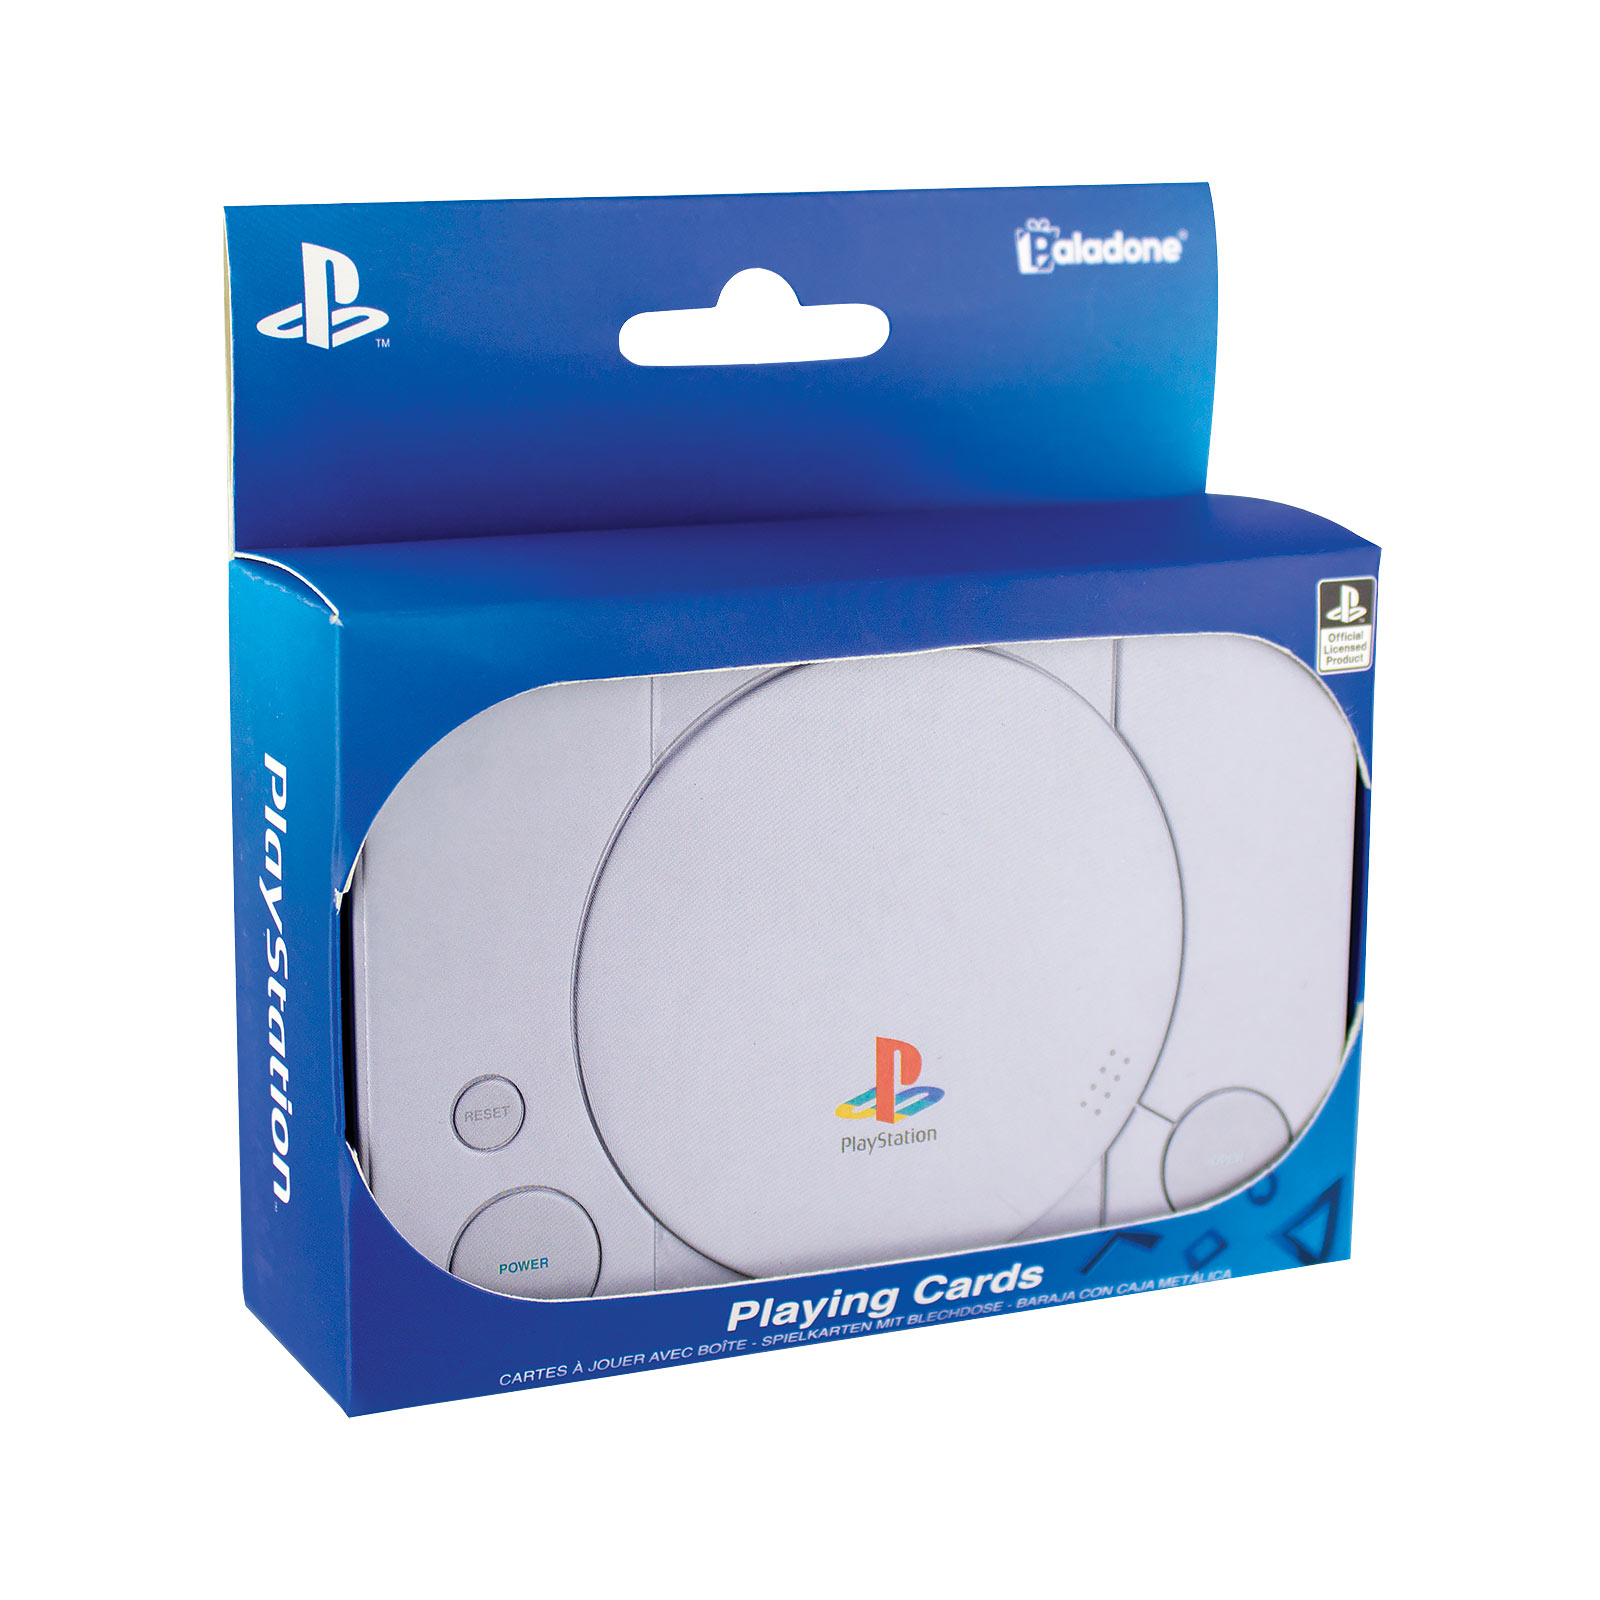 PlayStation - Playing Cards in Metal Box